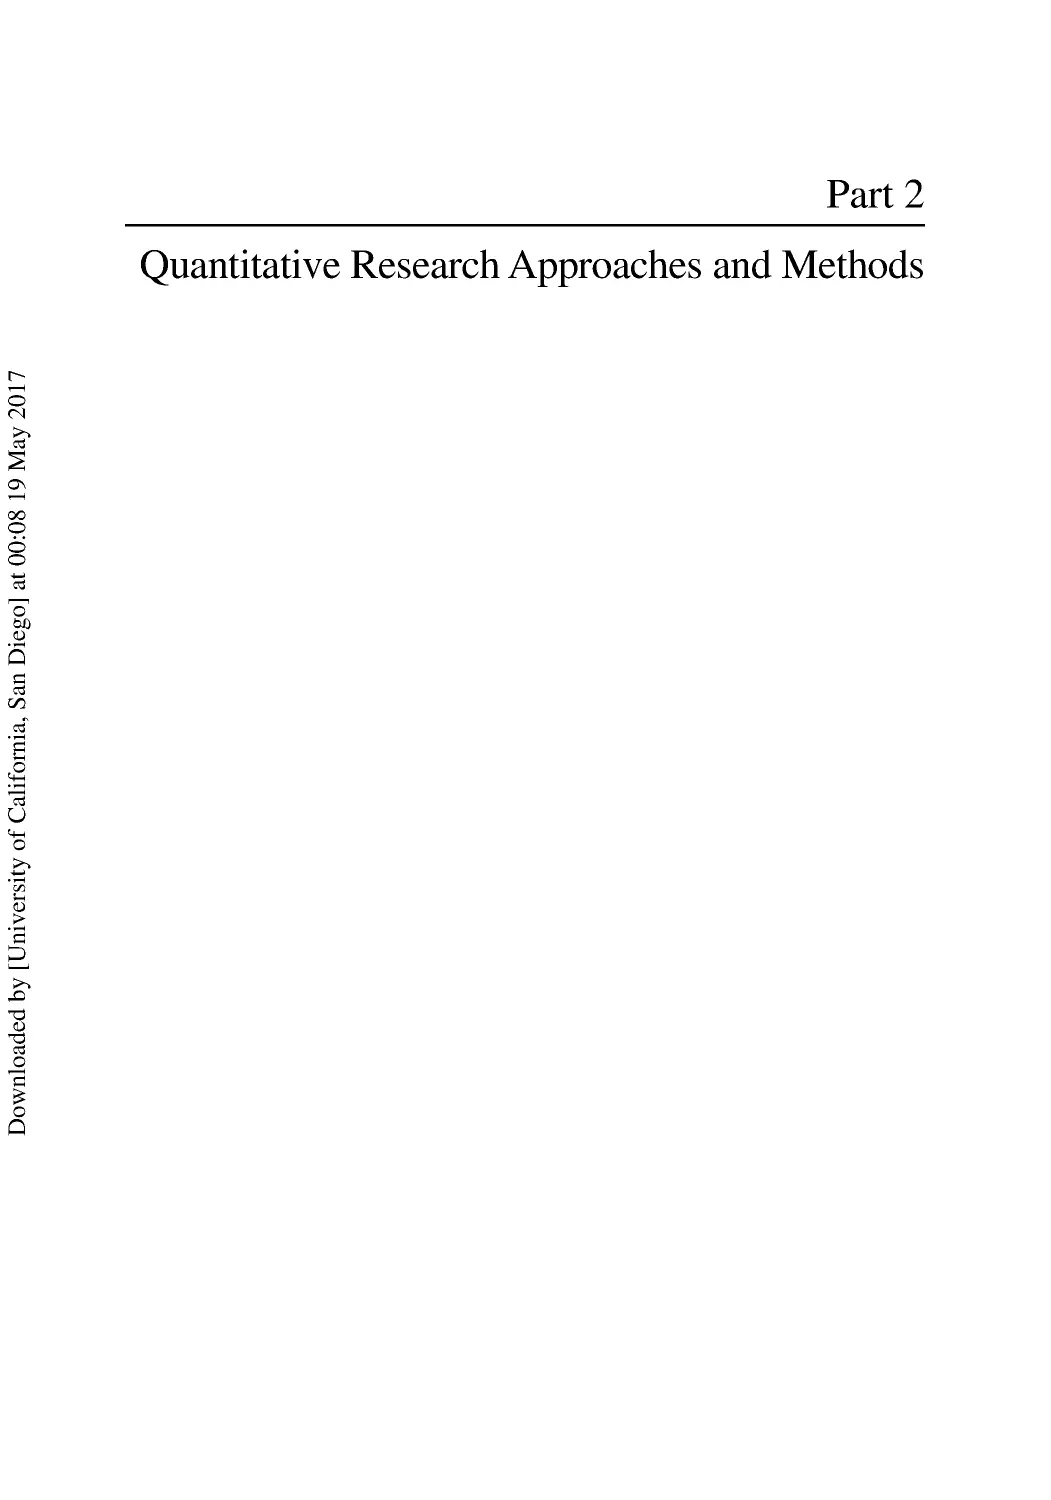 Part 2 Quantitative Research Approaches and Methods